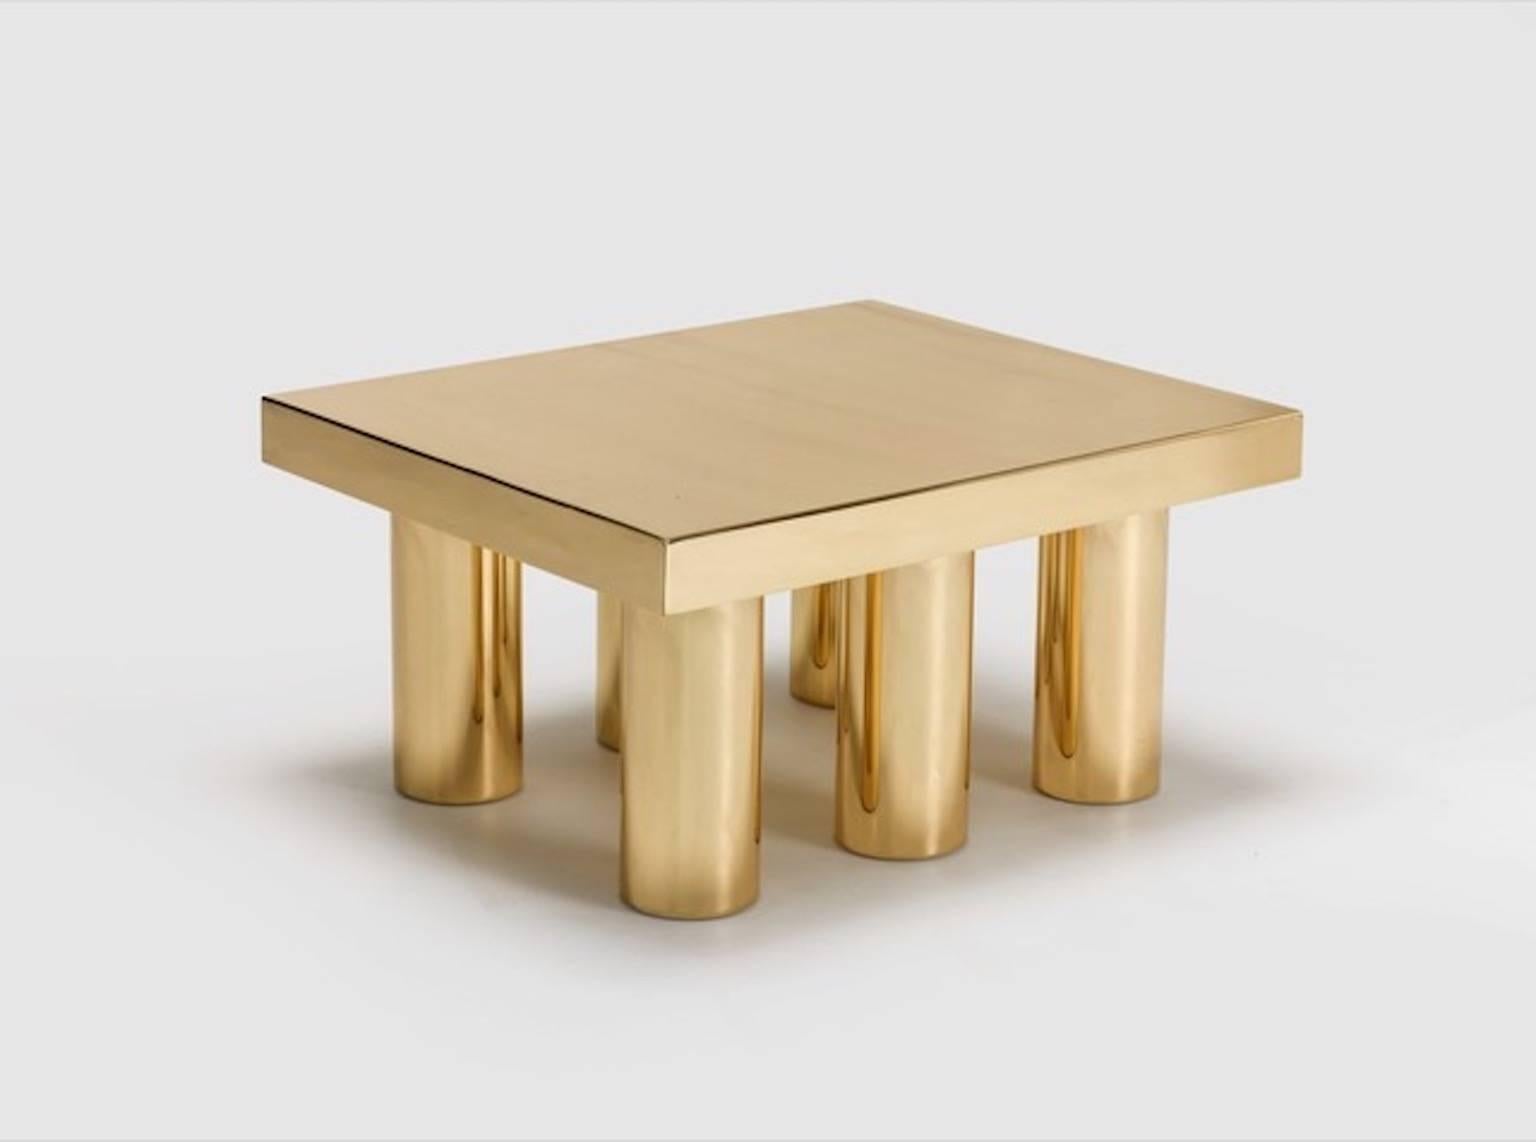 Two gold coffee table with structure completely polished brass designed by Studio Superego for Superego Editions.

Biography
Superego editions was born in 2006, performing a constant activity of research in decorative arts by offering both